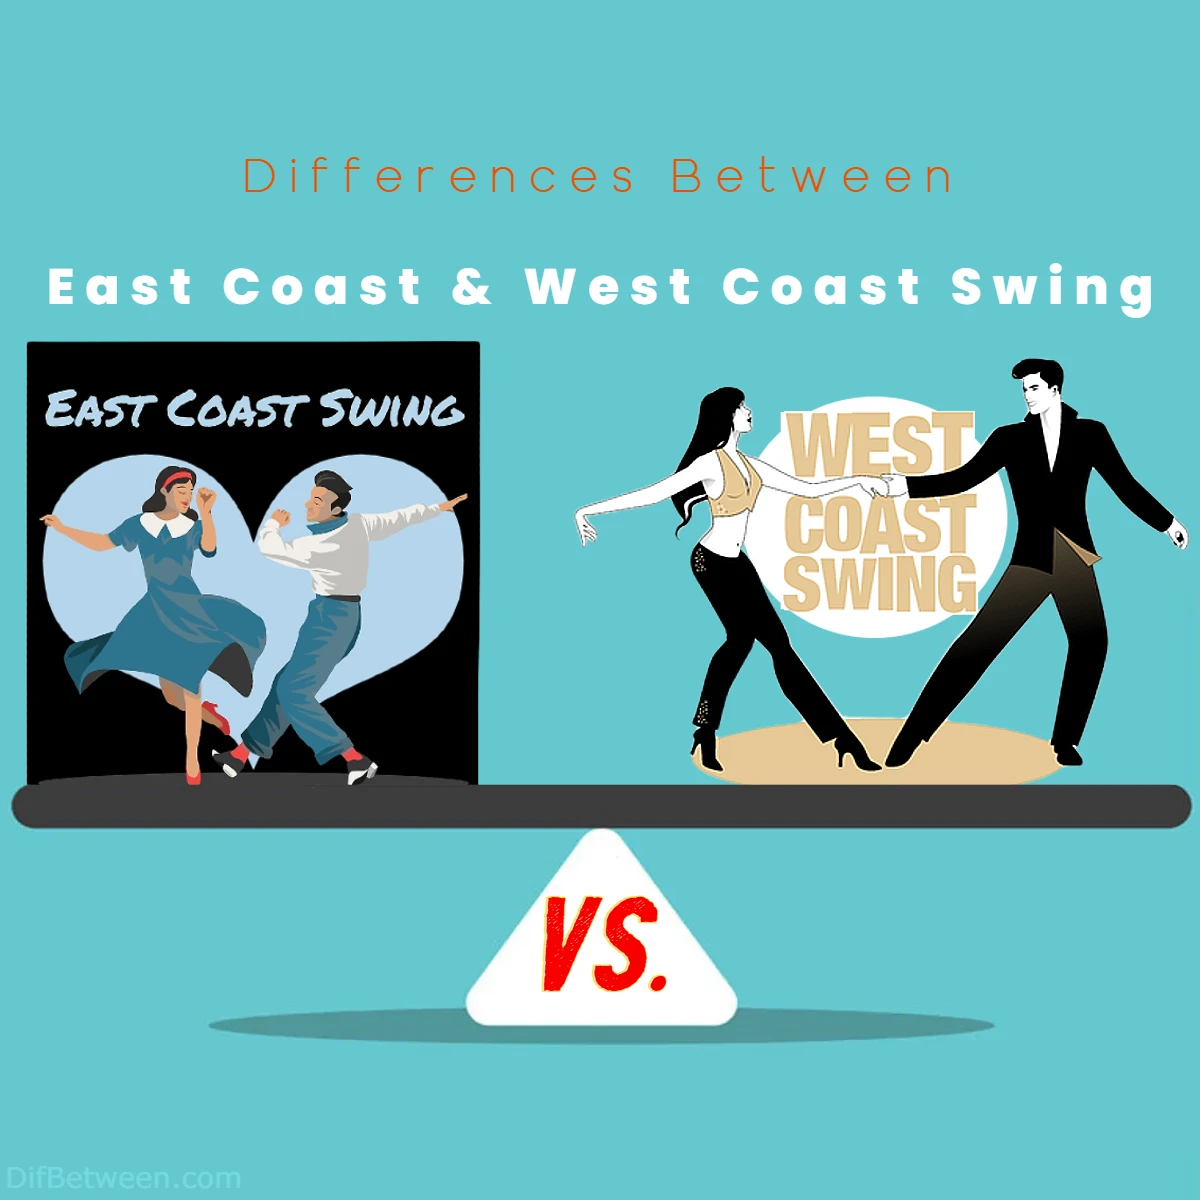 Differences Between East Coast vs West Coast Swing